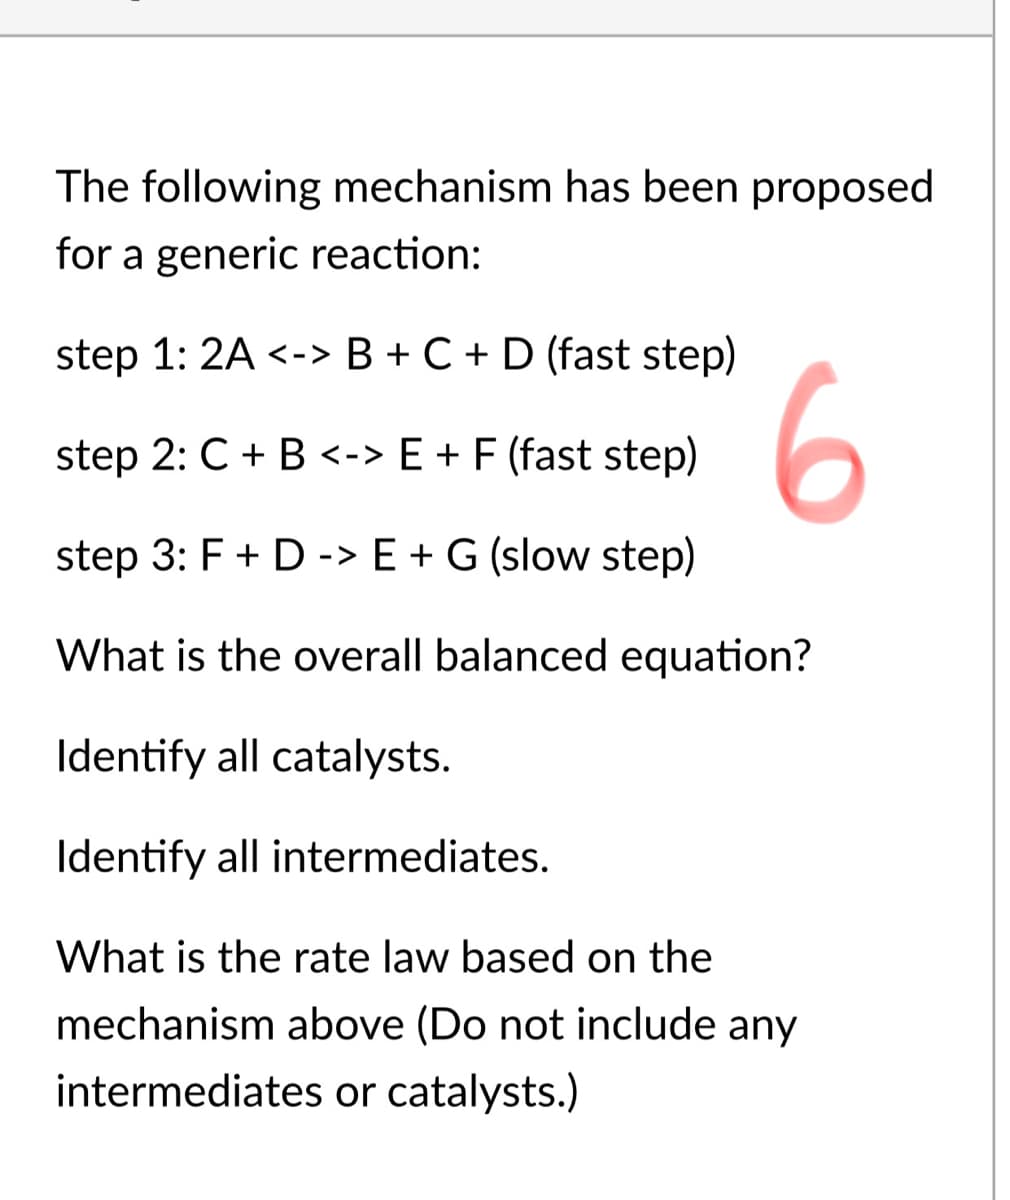 The following mechanism has been proposed
for a generic reaction:
step 1: 2A <-> B + C + D (fast step)
6
step 2: C + B <-> E + F (fast step)
step 3: F + D -> E + G (slow step)
What is the overall balanced equation?
Identify all catalysts.
Identify all intermediates.
What is the rate law based on the
mechanism above (Do not include any
intermediates or catalysts.)
